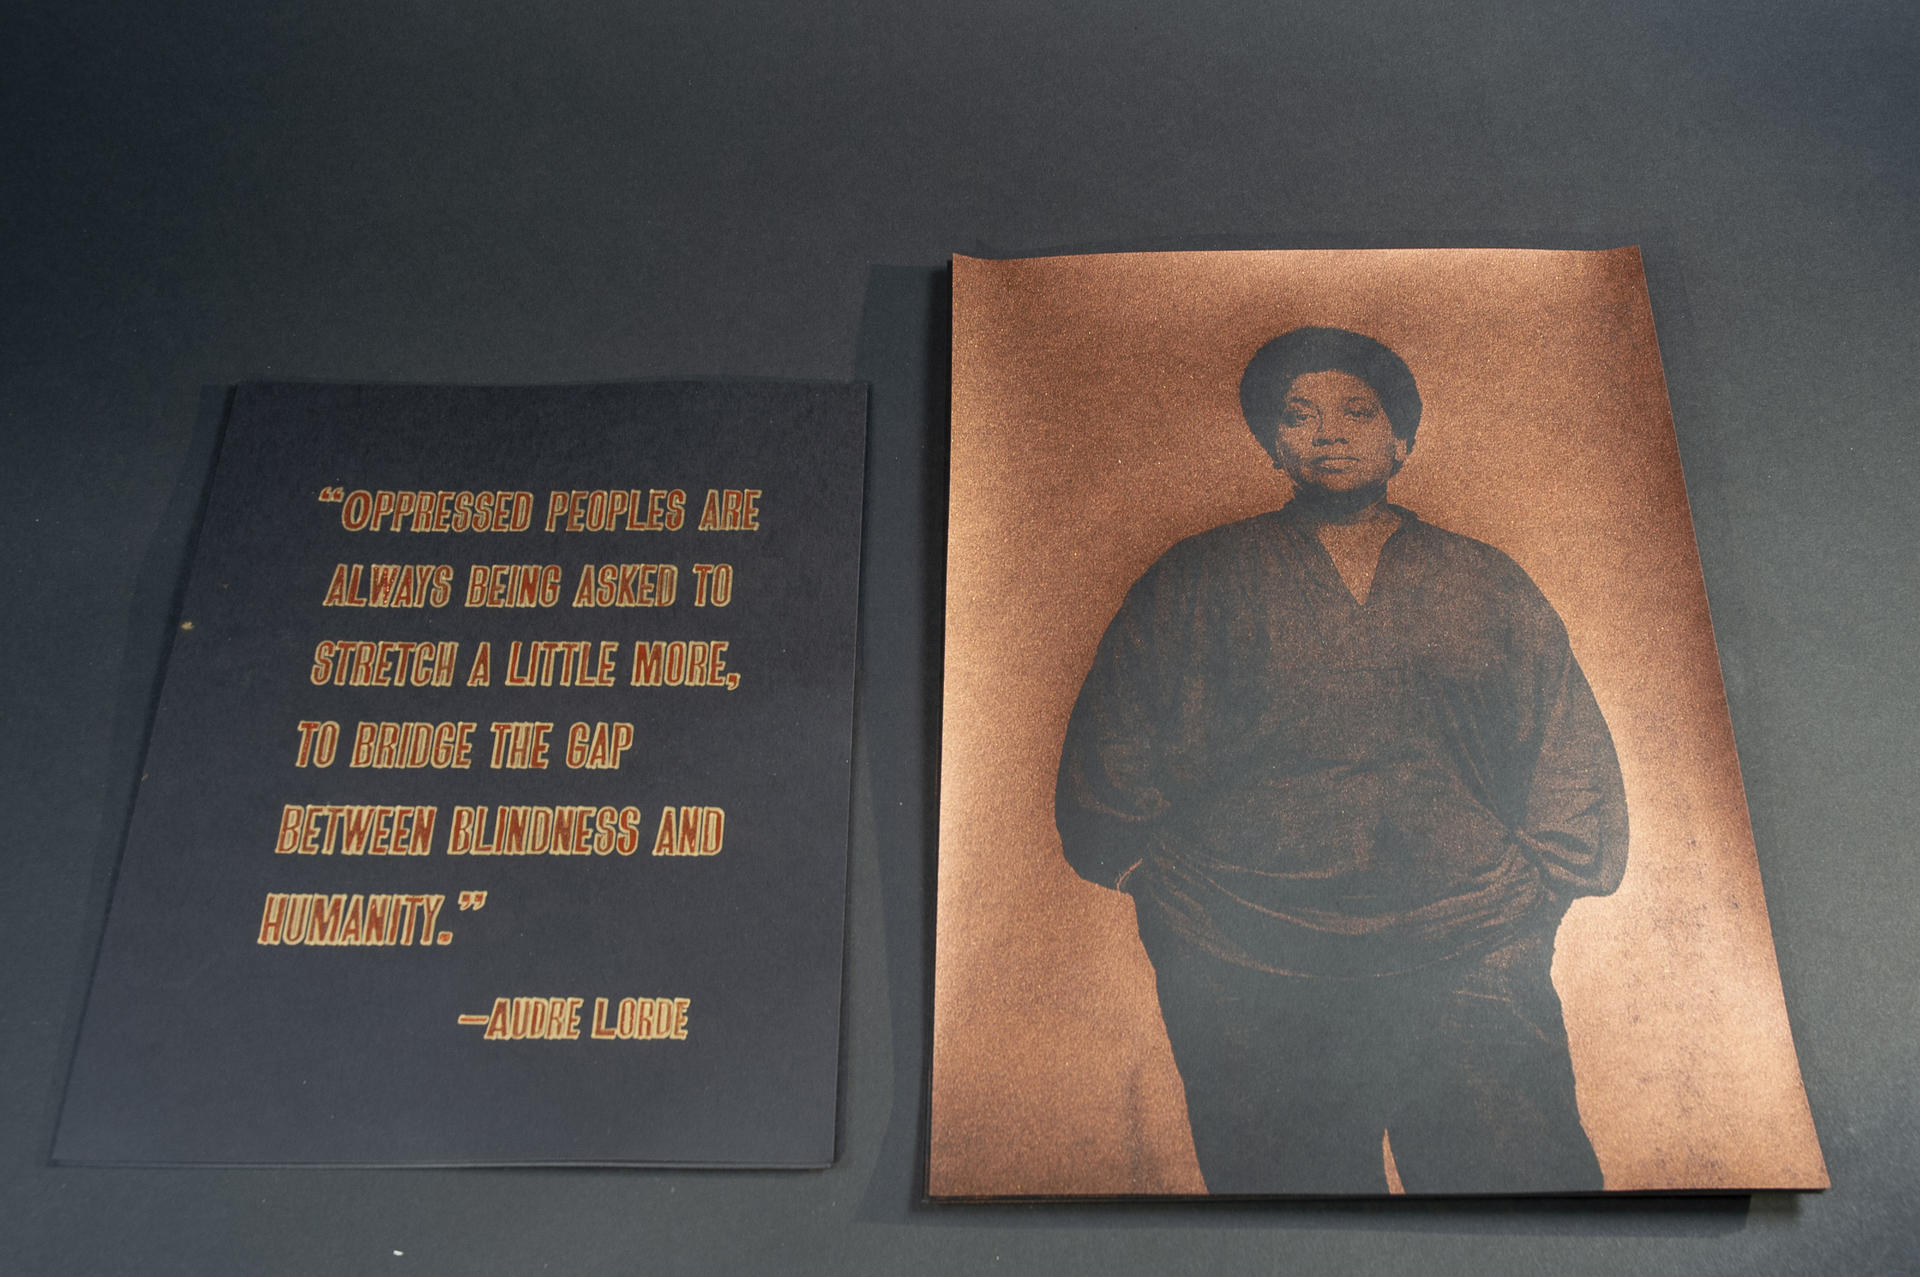 two copper colored prints, one of Audre Lorde and the other a quote by her